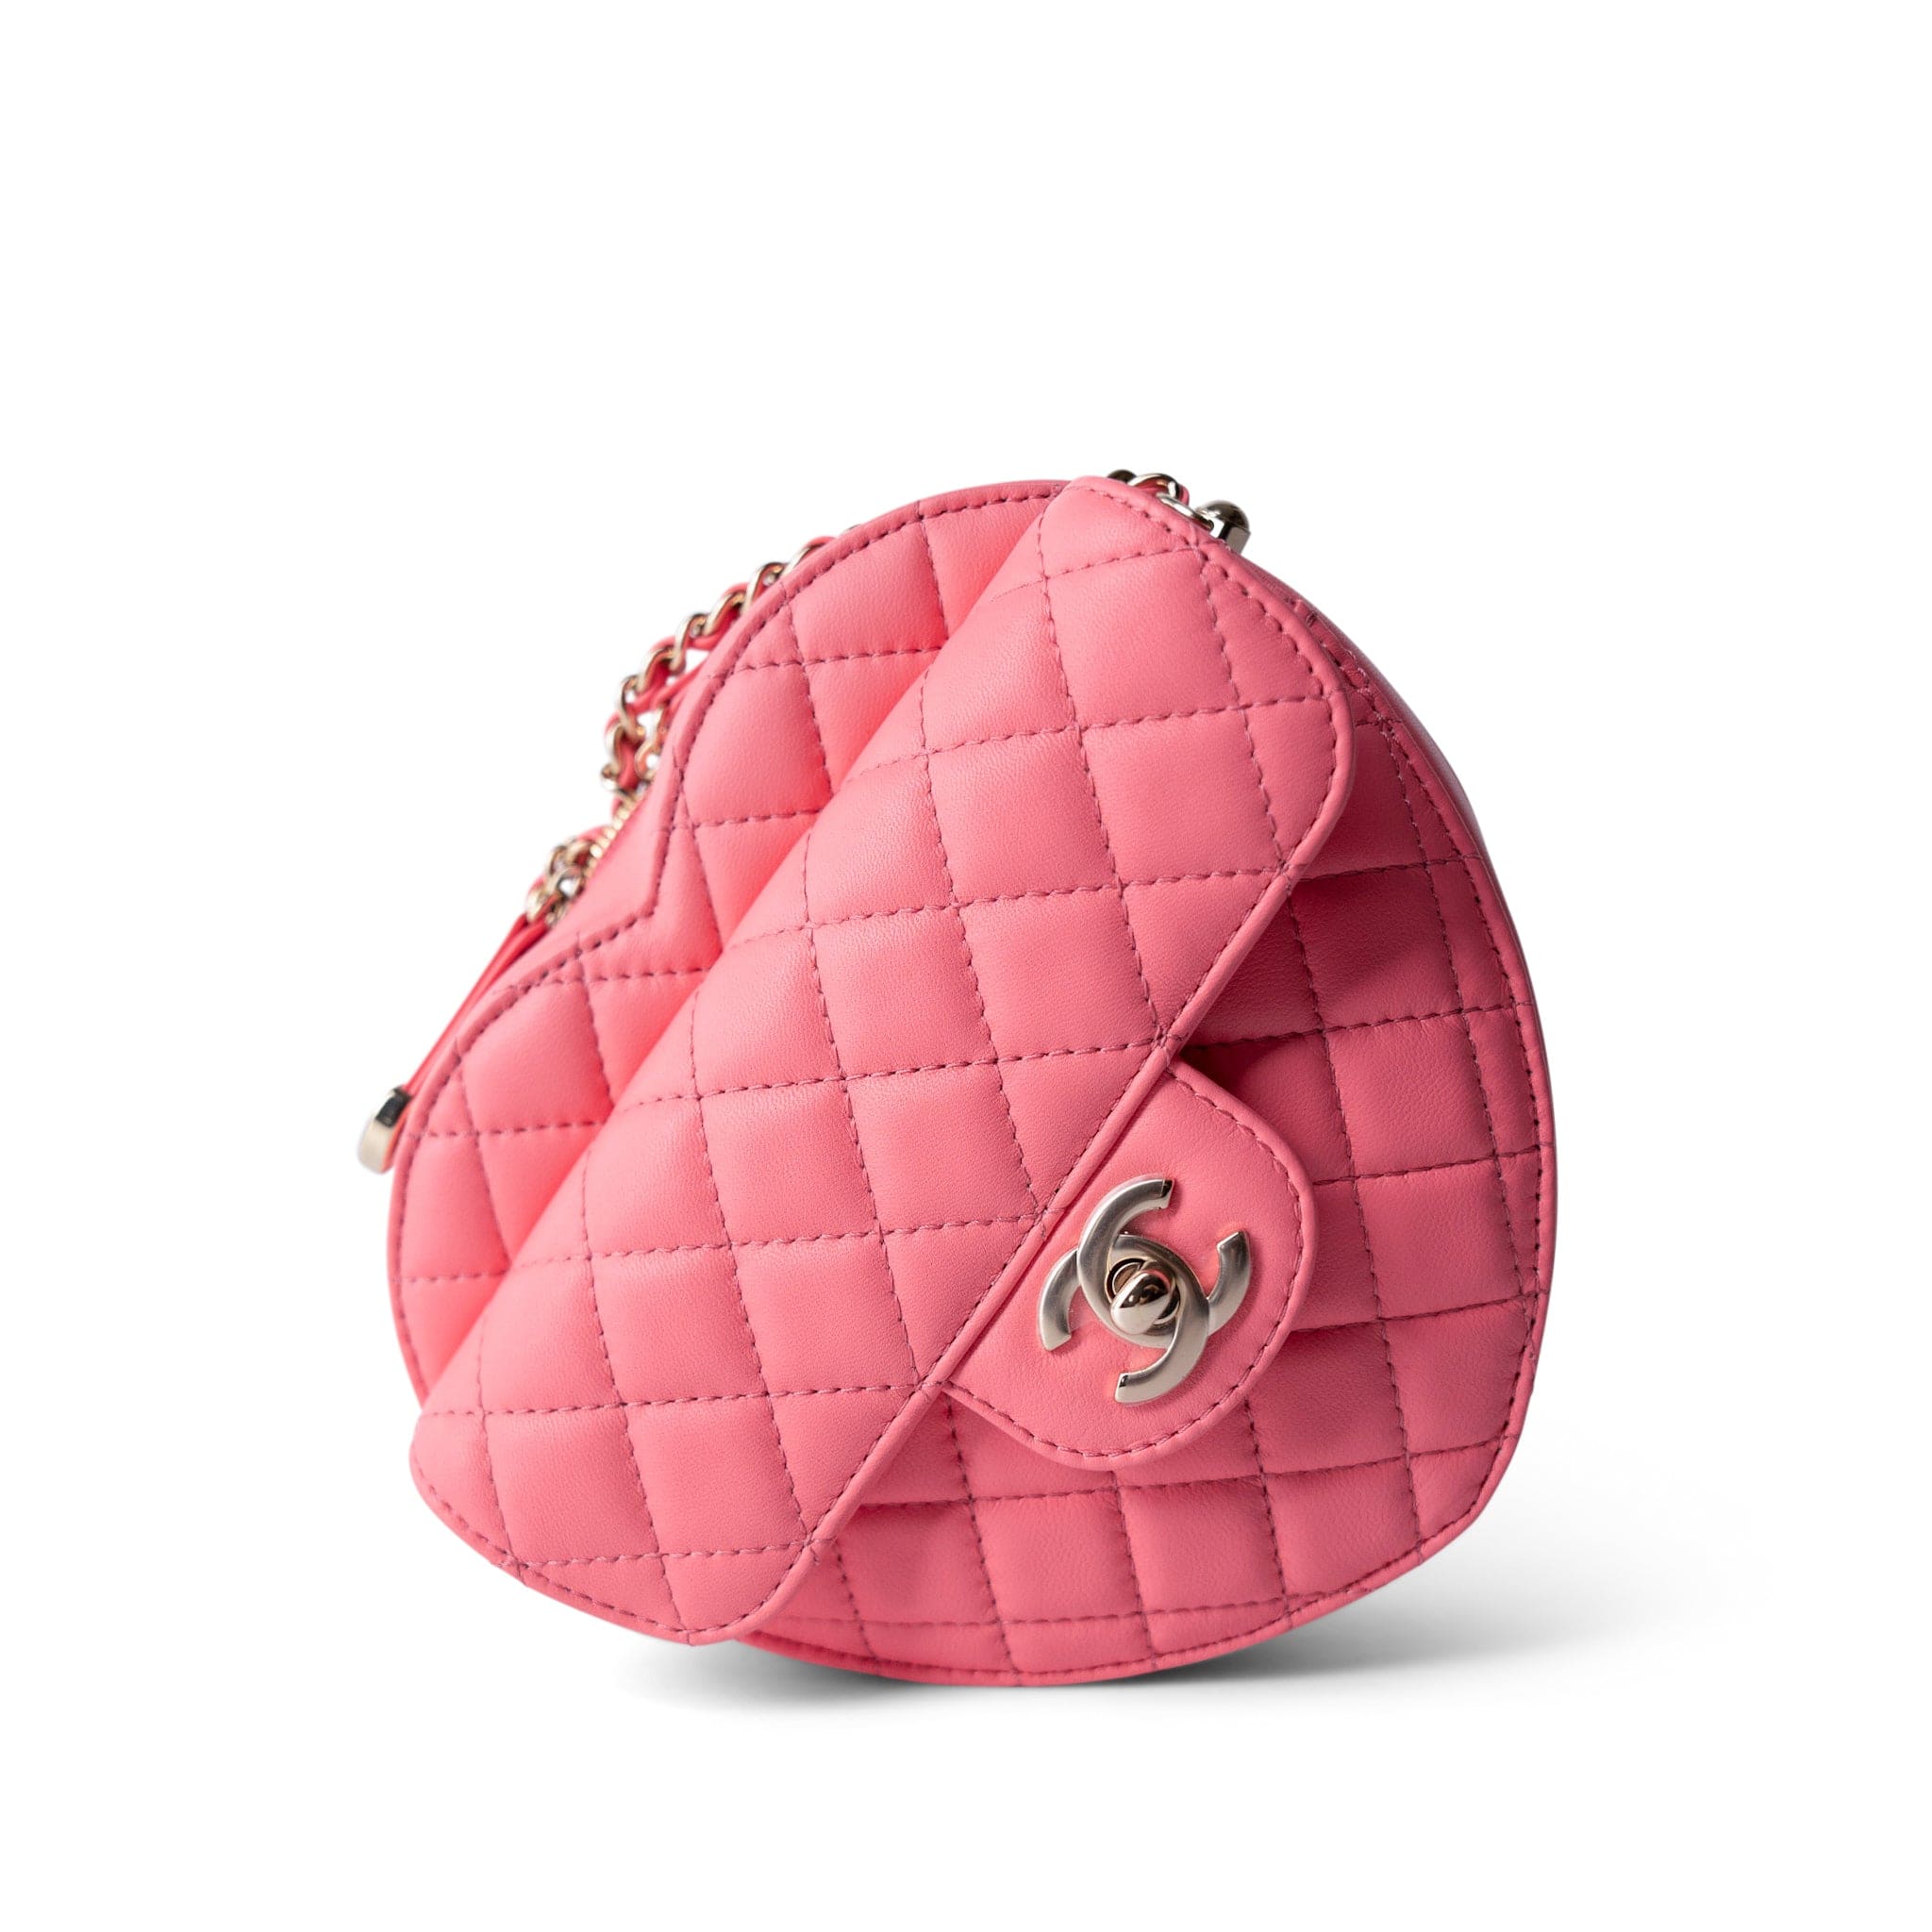 REDELUXE 22S Pink Lambskin Quilted Large Heart Bag Light Gold Hardware - Redeluxe